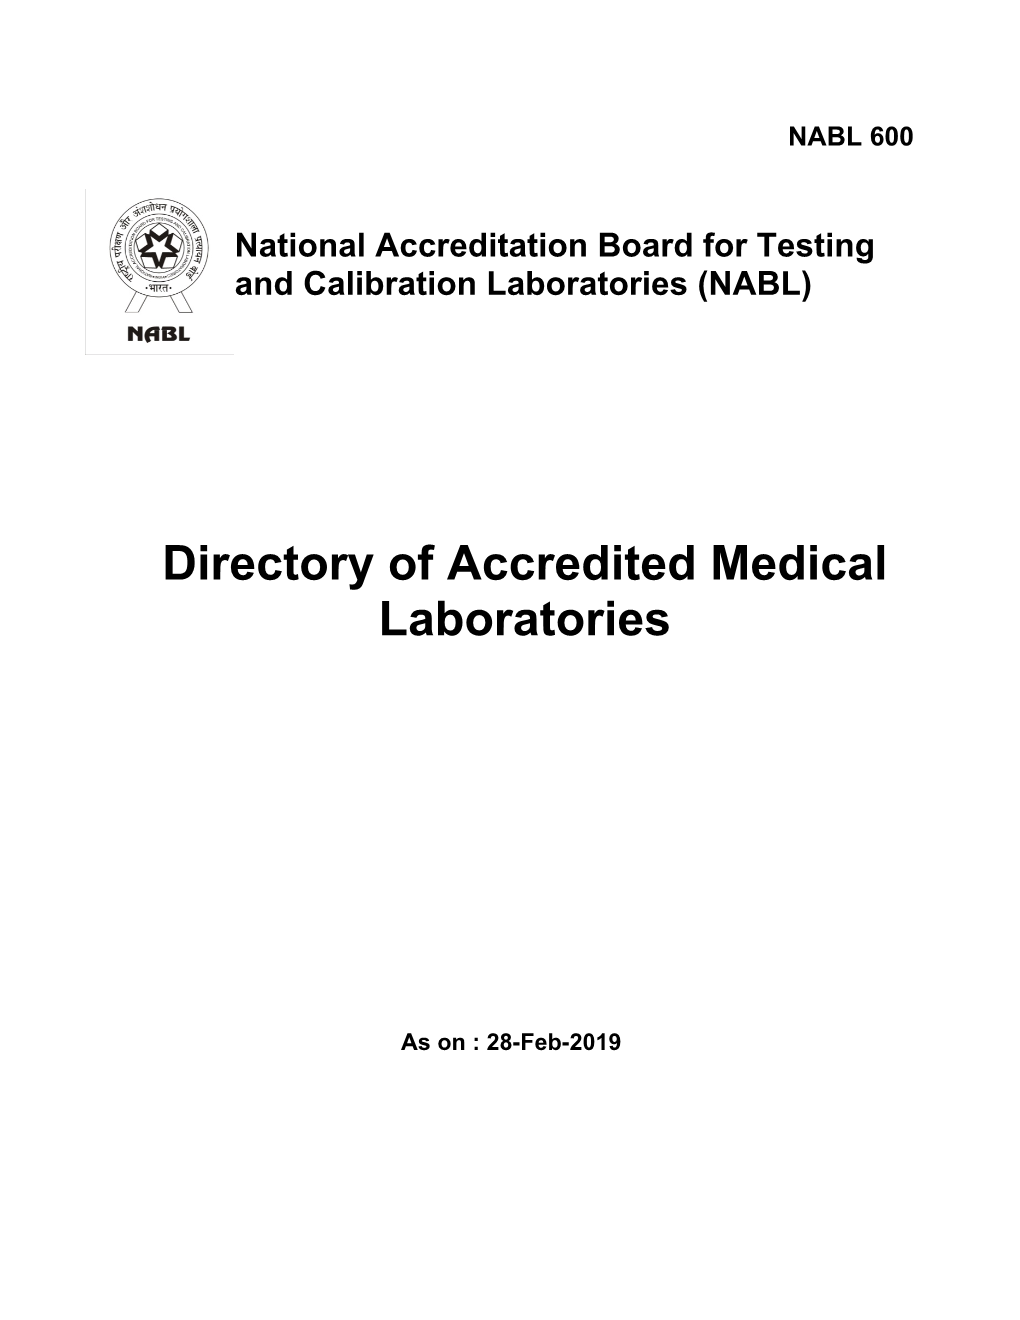 Directory of Accredited Medical Laboratories